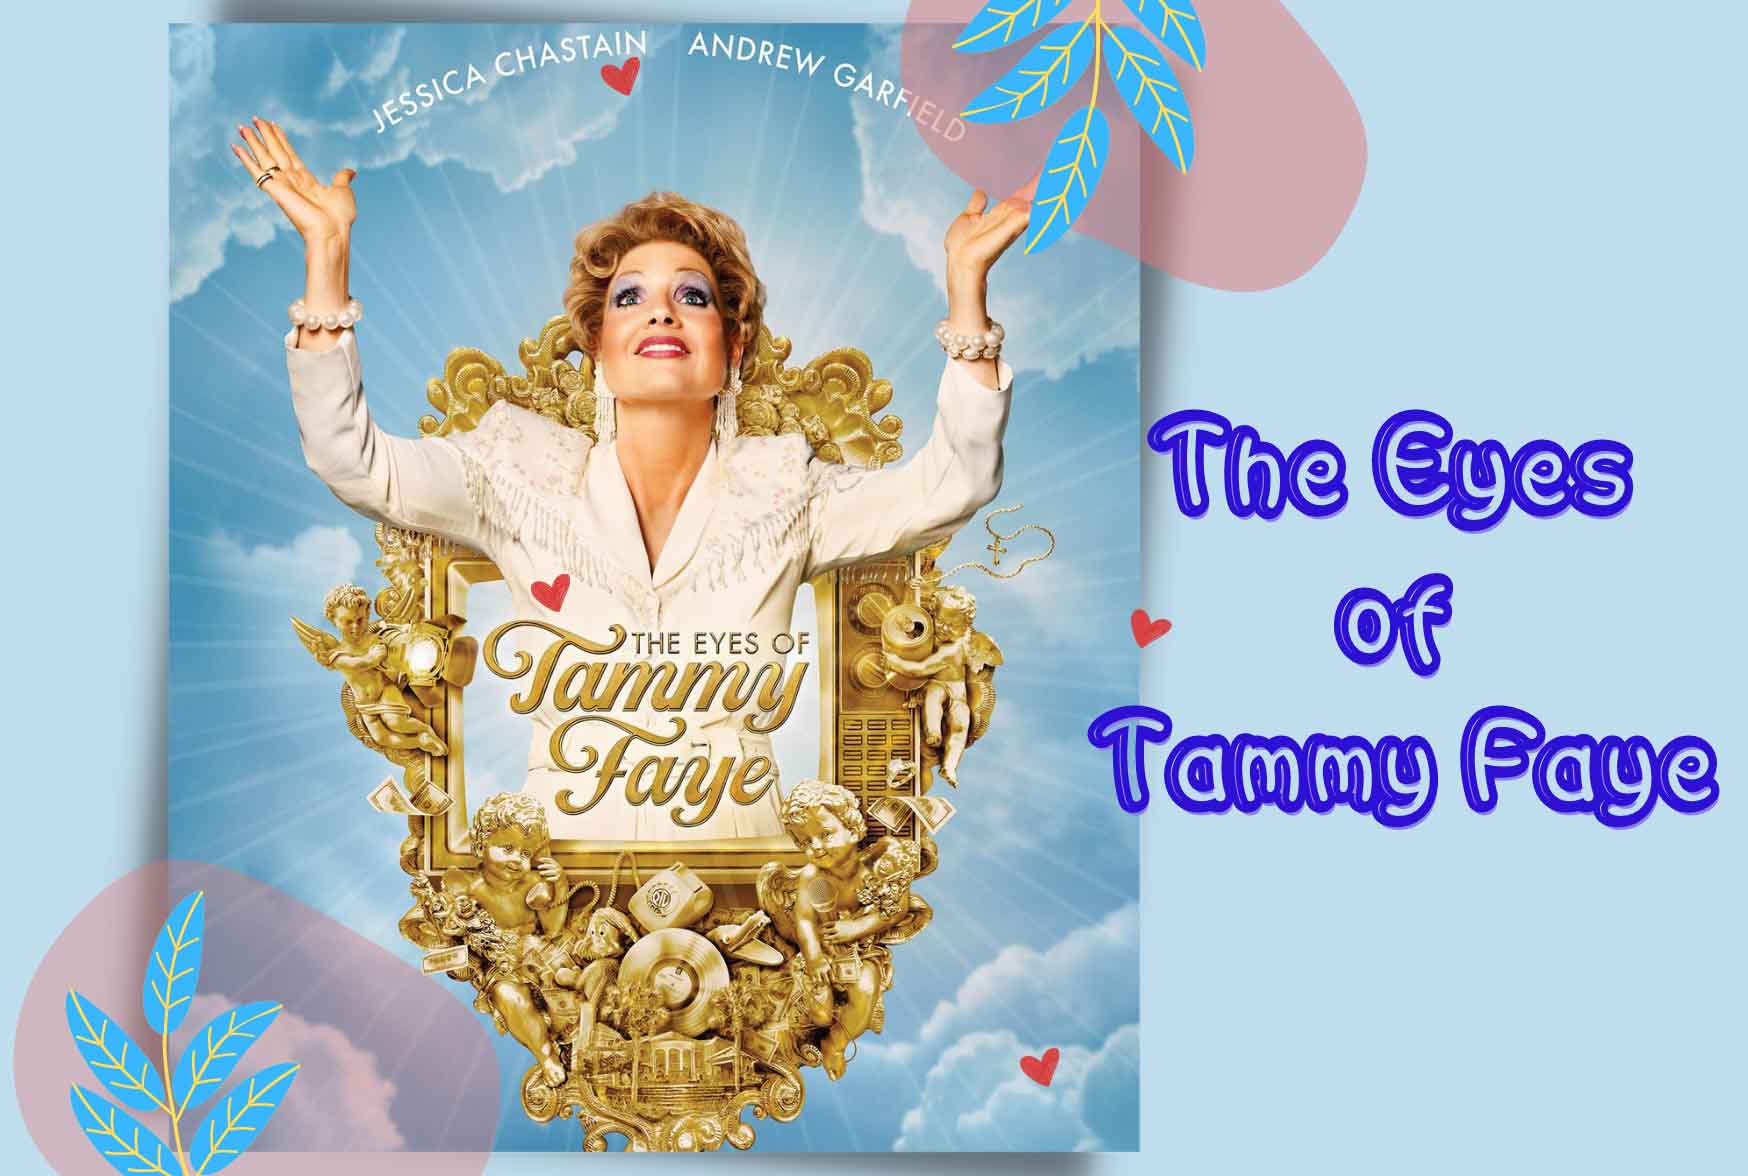 The Eyes of Tammy Faye wallpaper and images